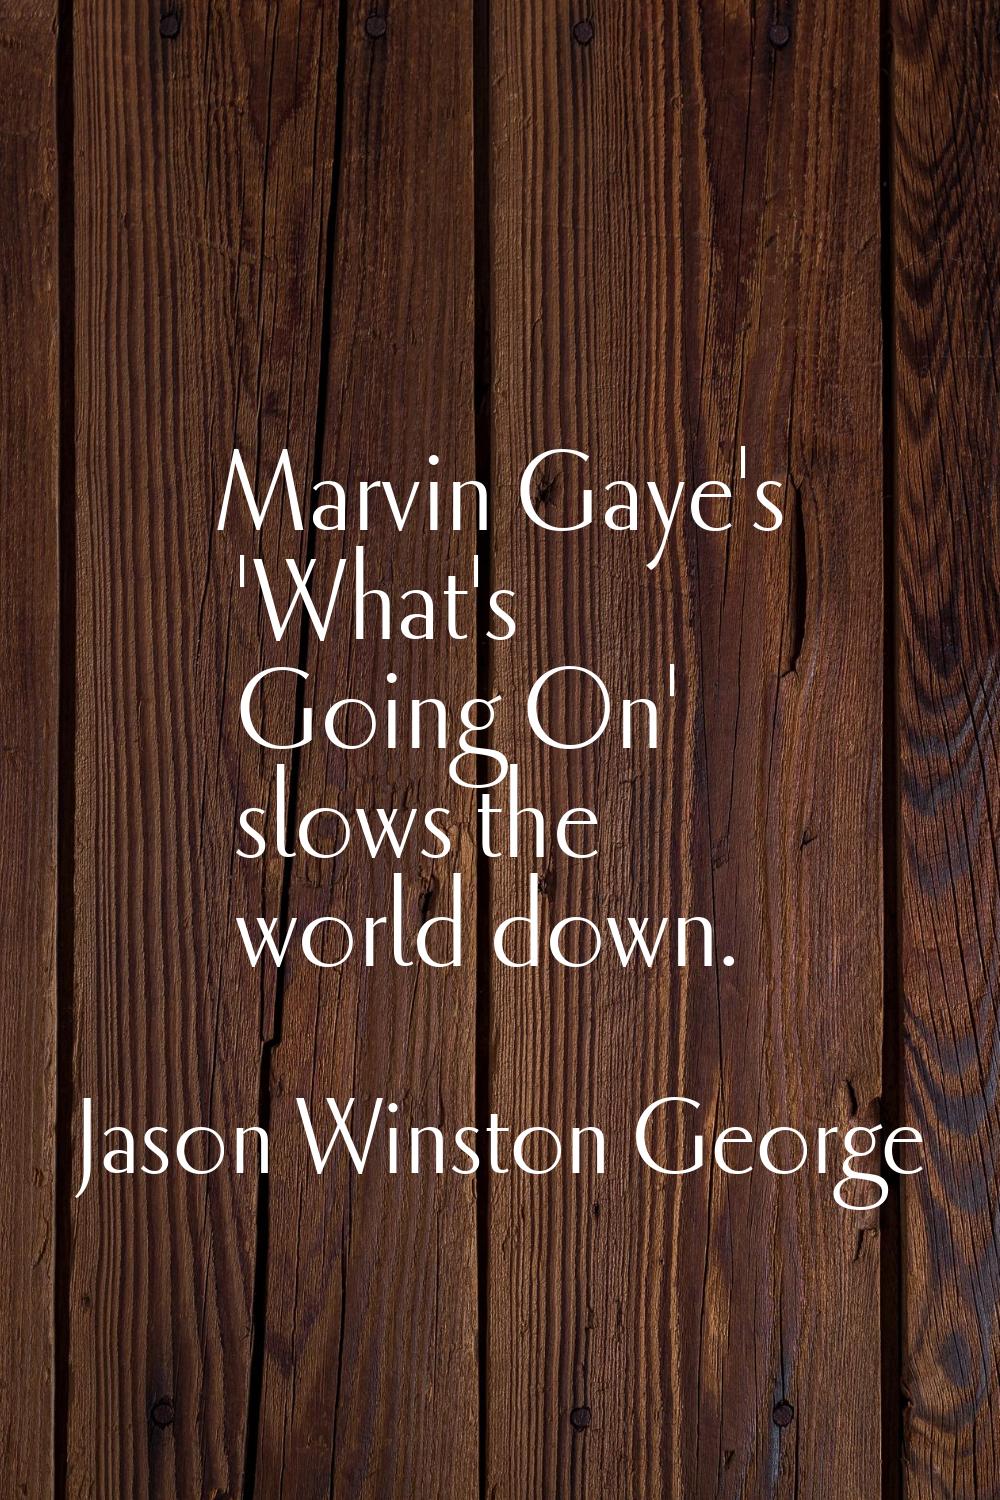 Marvin Gaye's 'What's Going On' slows the world down.